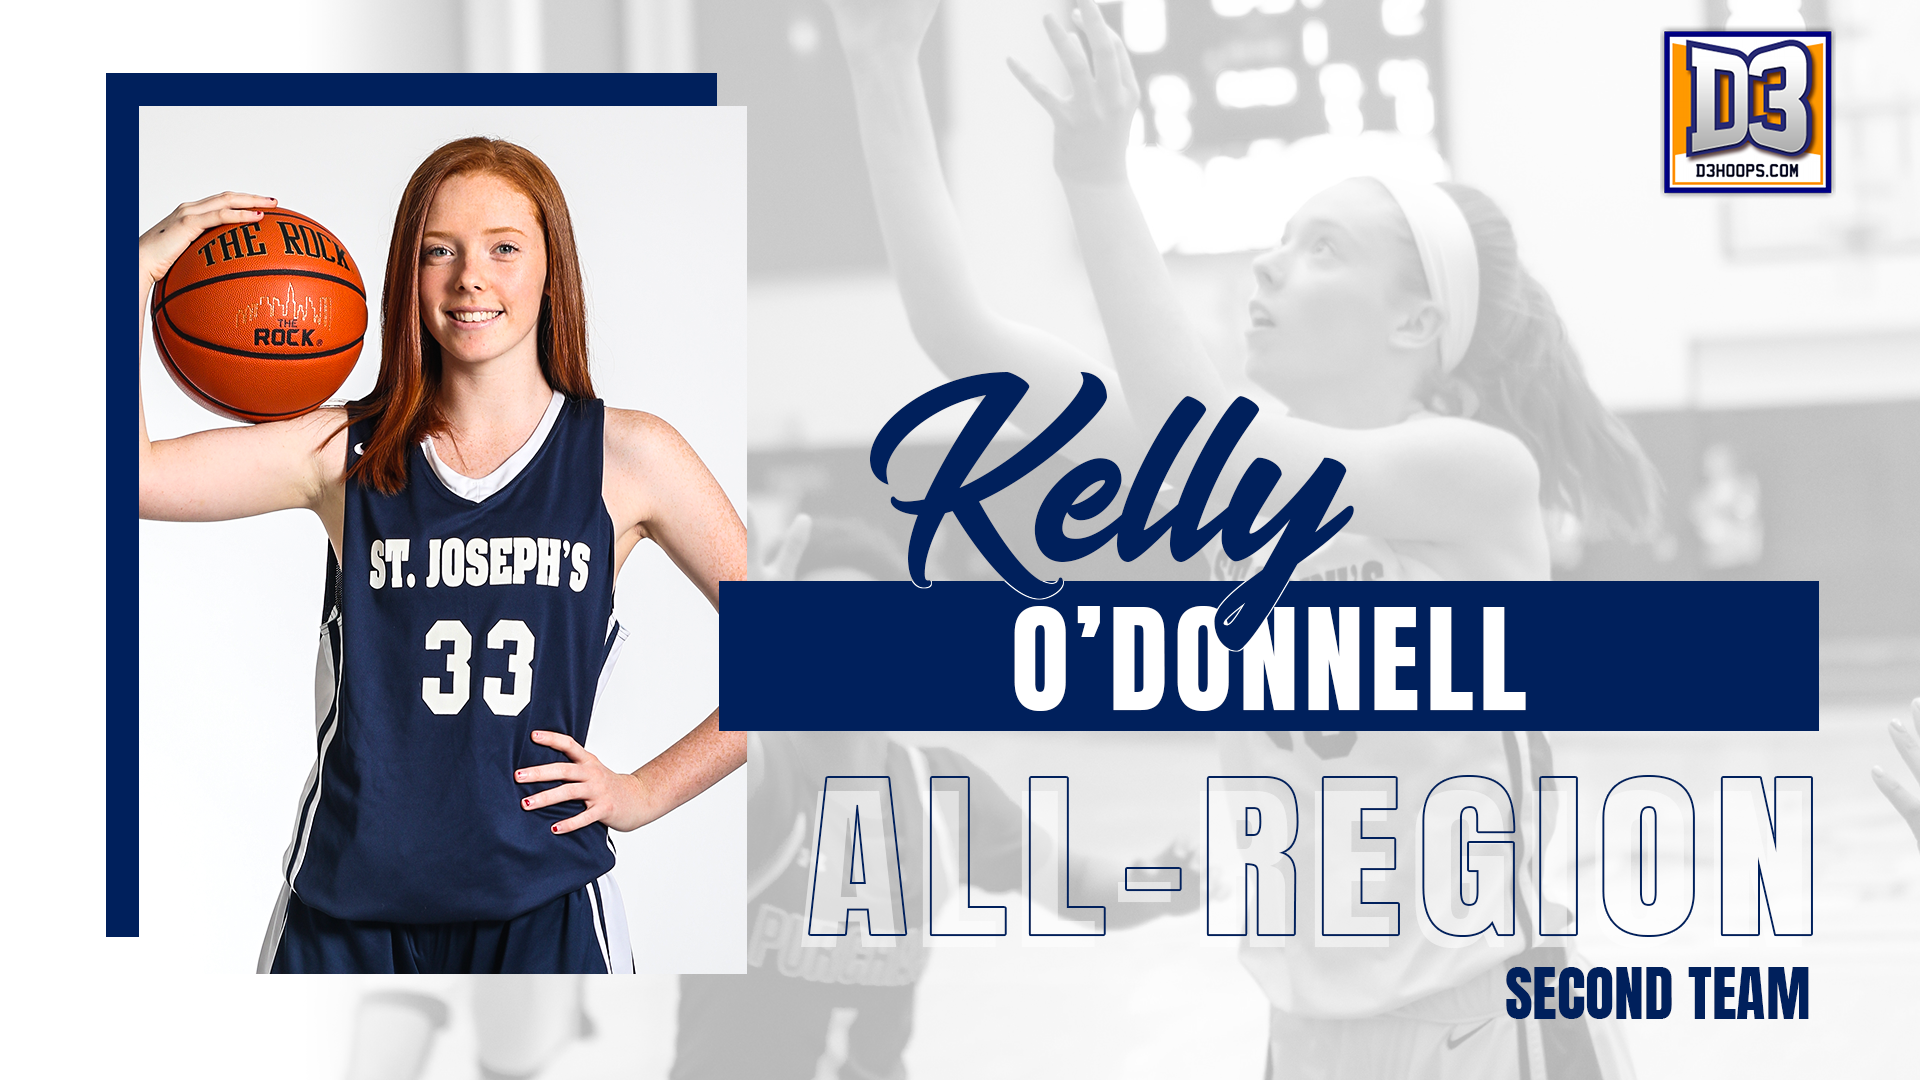 O'Donnell Receives D3hoops.com All-Region Honors